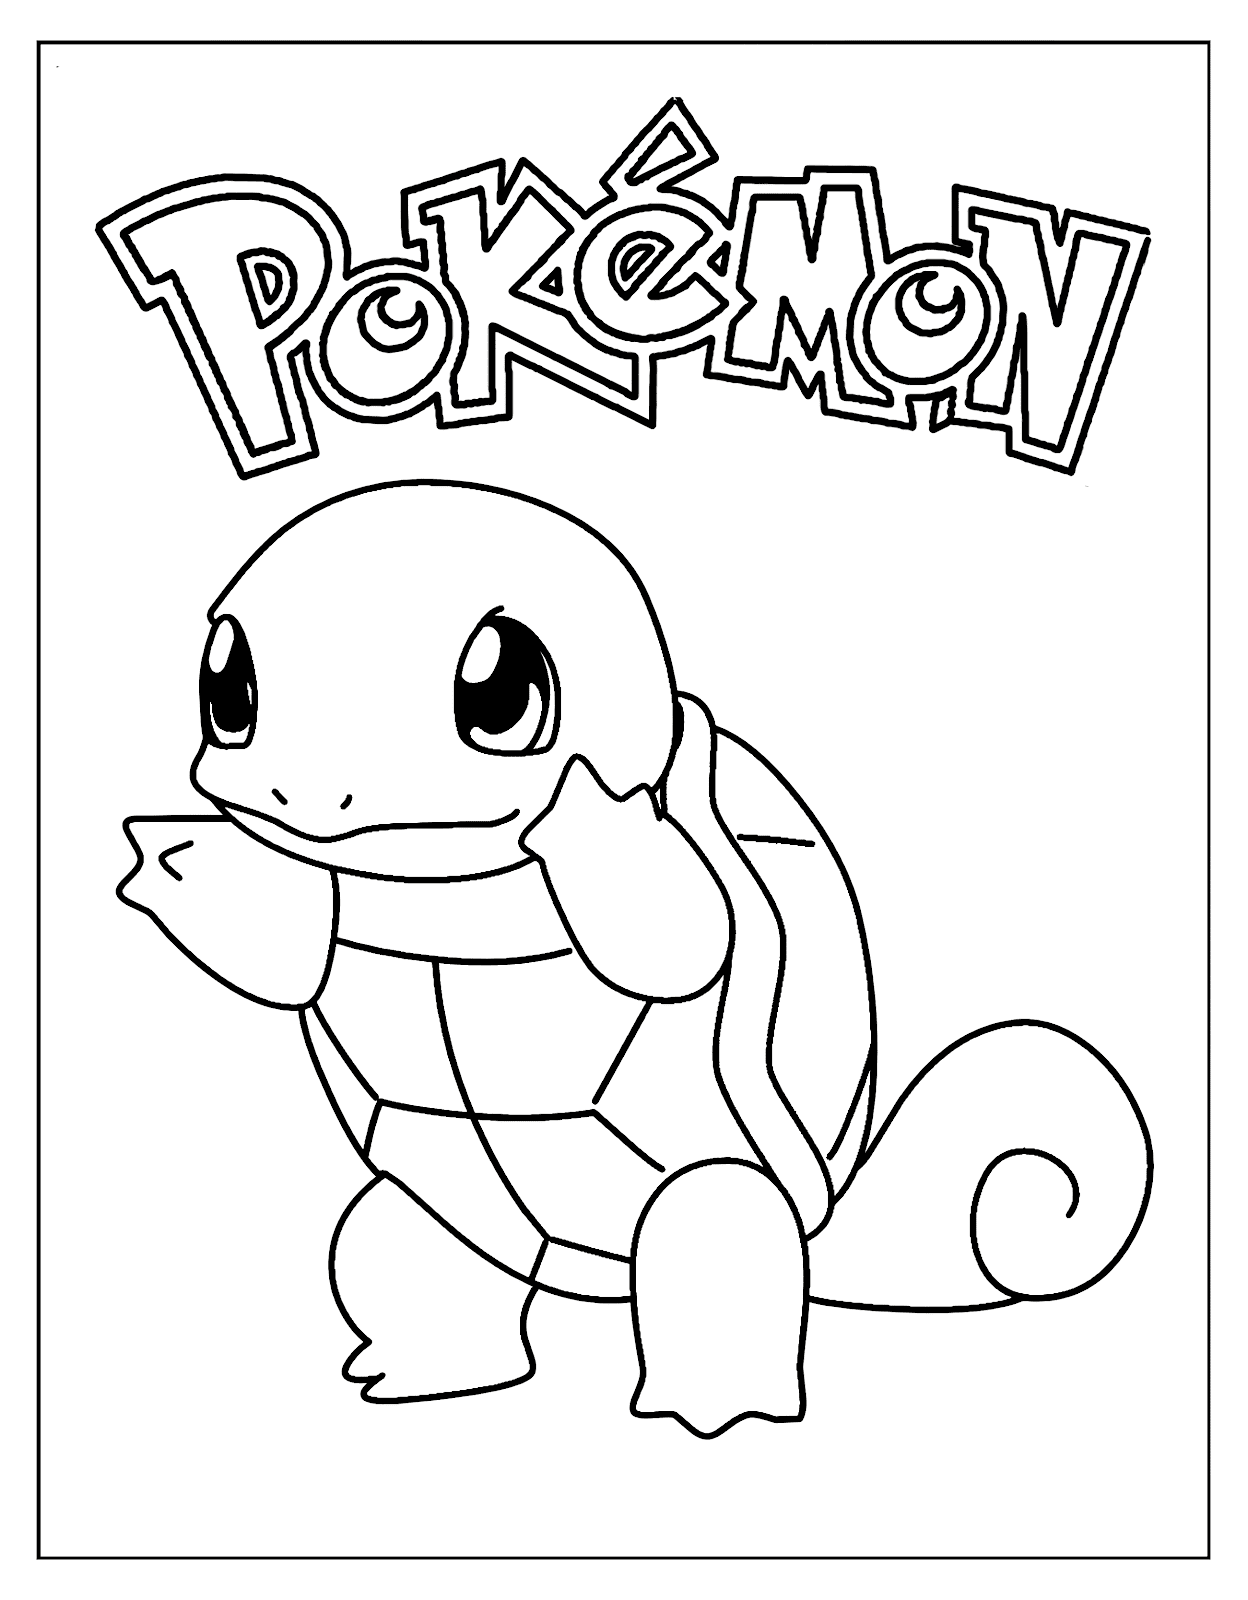 New Squirtle Coloring Pages Download - Free Pokemon Coloring Pages